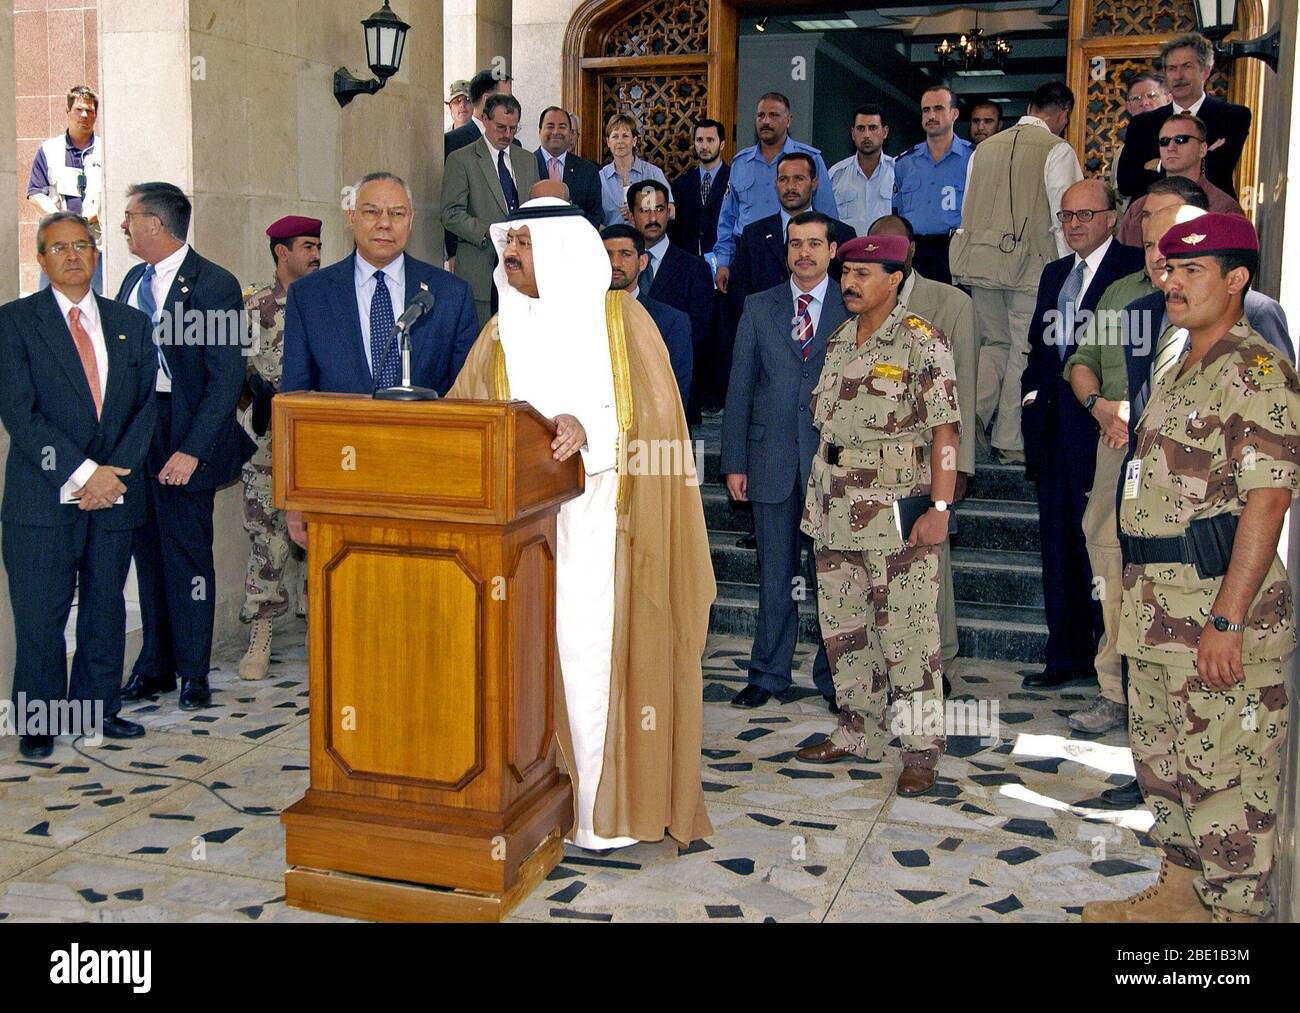 The Honorable Colin L. Powell (left), US Secretary of State, and Iraqi President Sheik Ghazi al-Yawar (Ghazi Mashal Ajil al-Yawar), Interim President of Iraq, both standing behind the lectern, address the media at an official press conference in Baghdad, Baghdad Province, Iraq (IRQ), during Operation IRAQI FREEDOM. Stock Photo